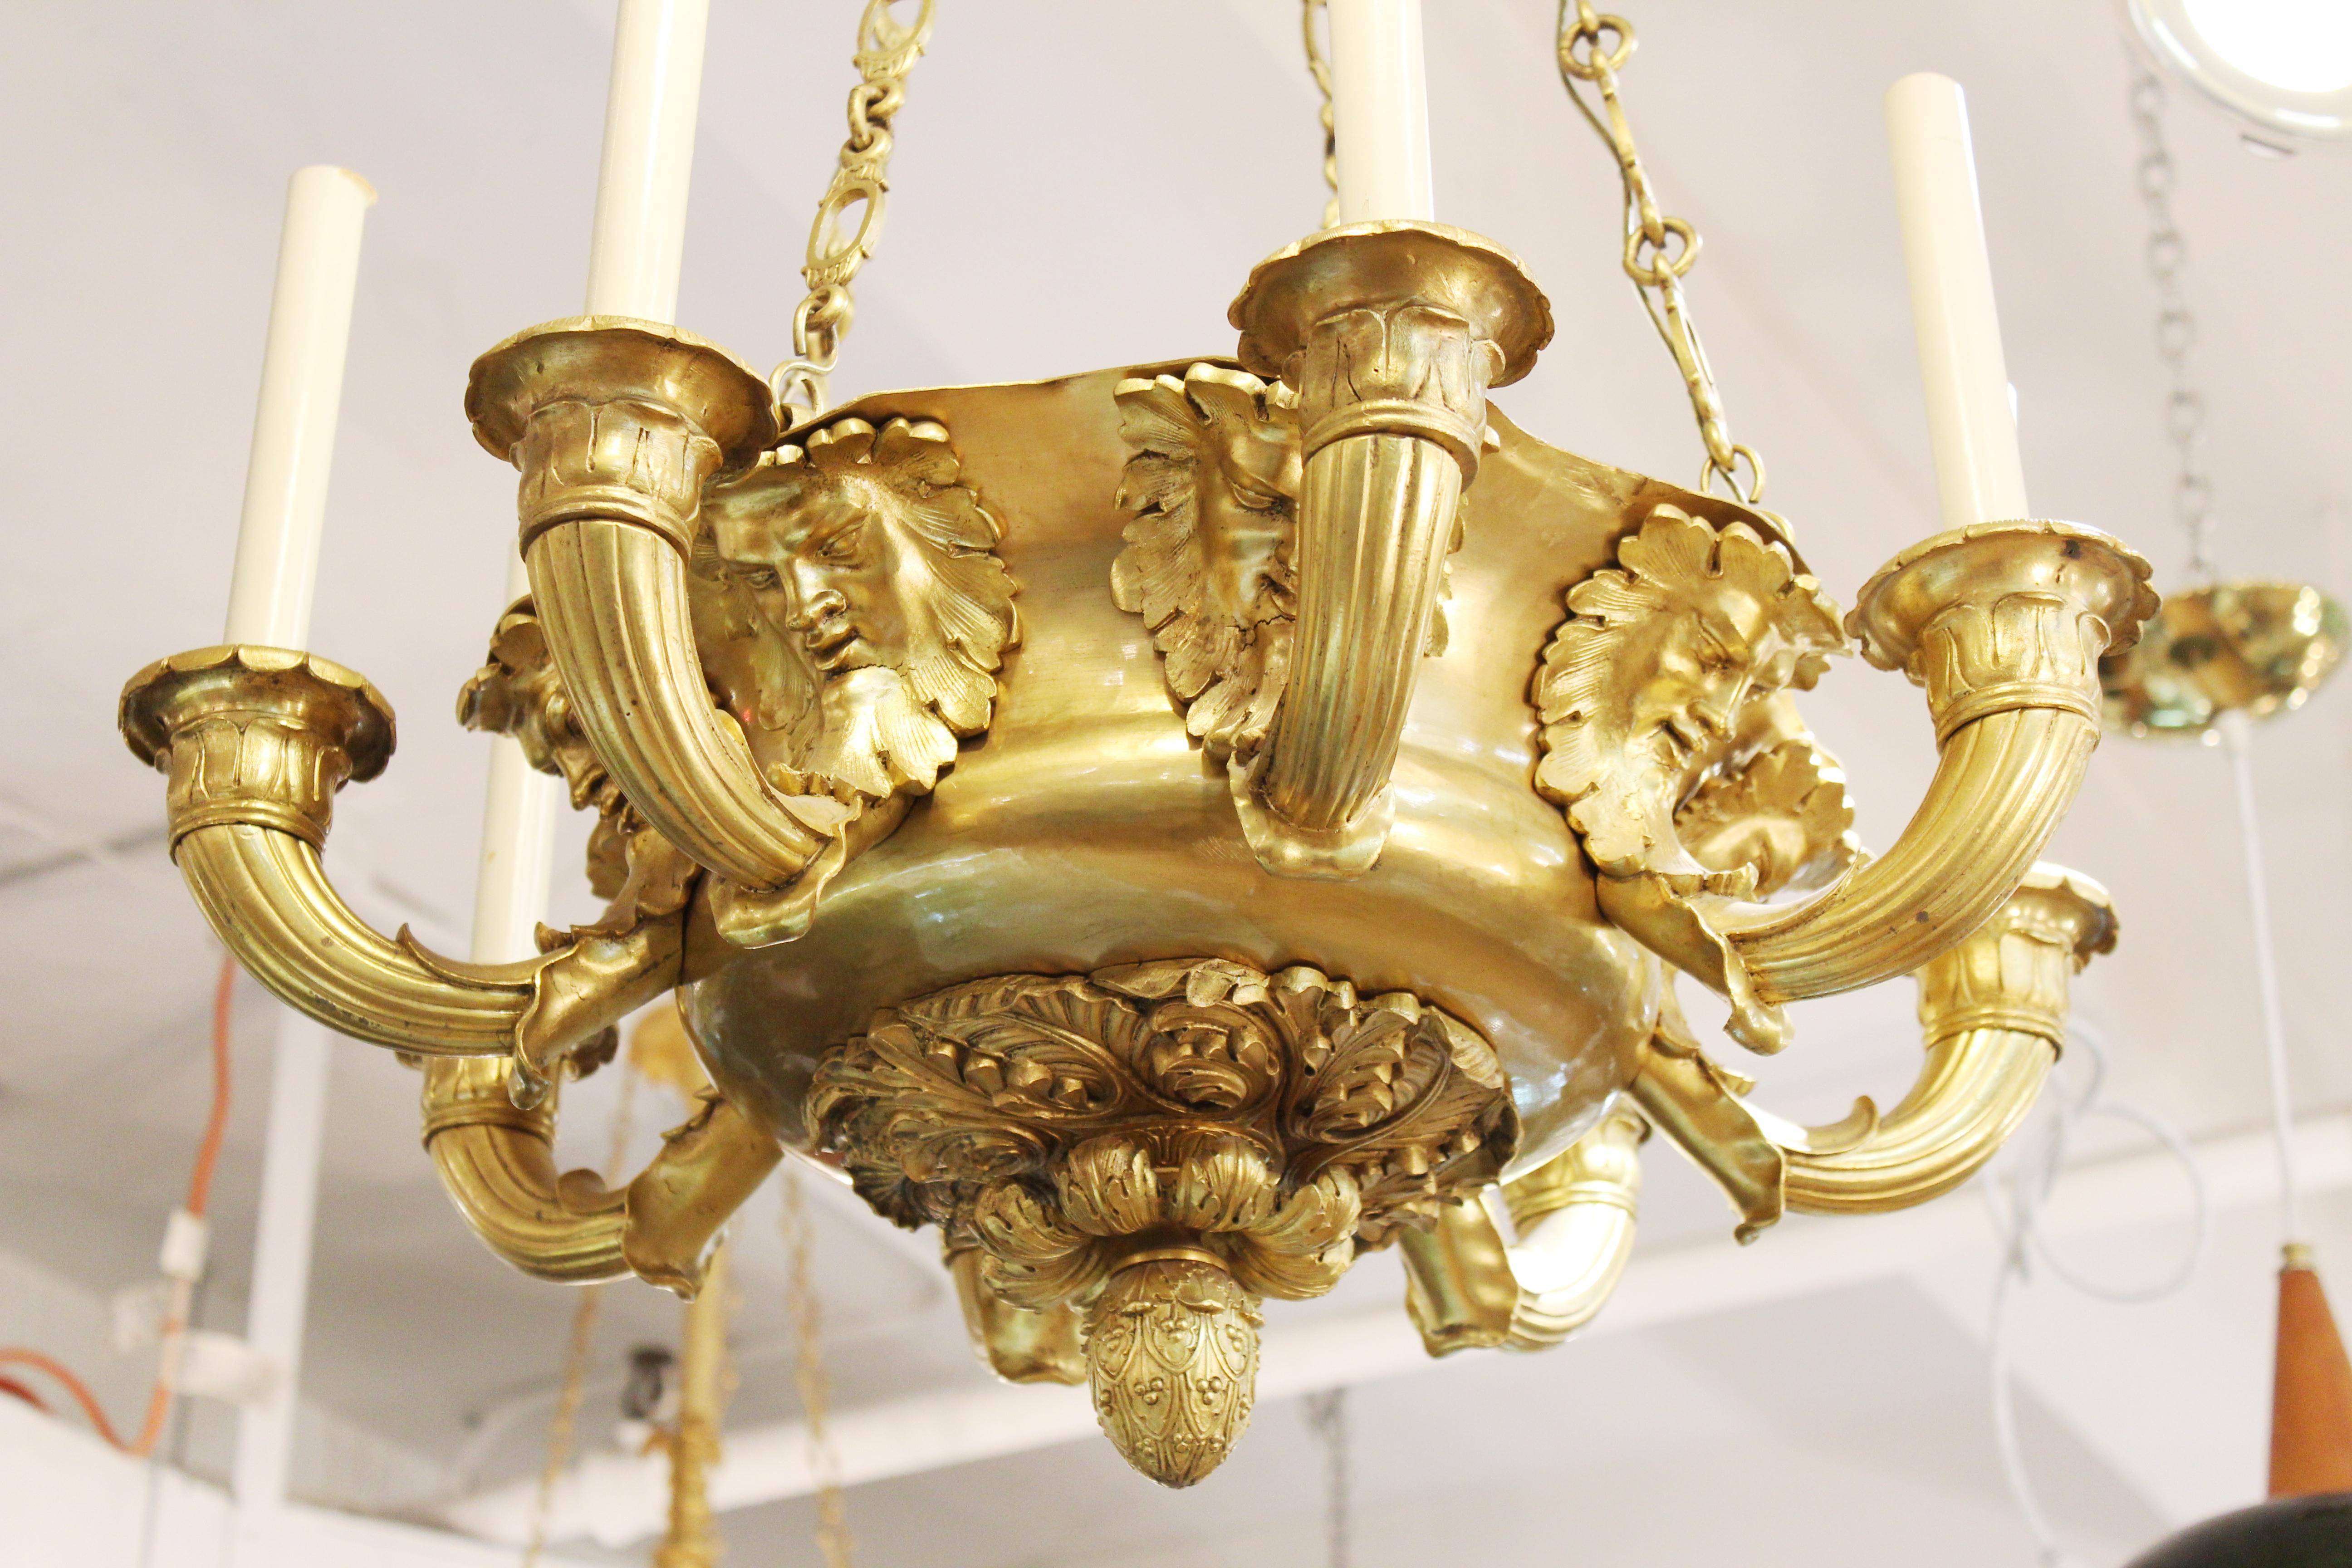 French Charles X gilt bronze eight-arm chandelier with mascaron (mask / masque) figures. Measures: 34